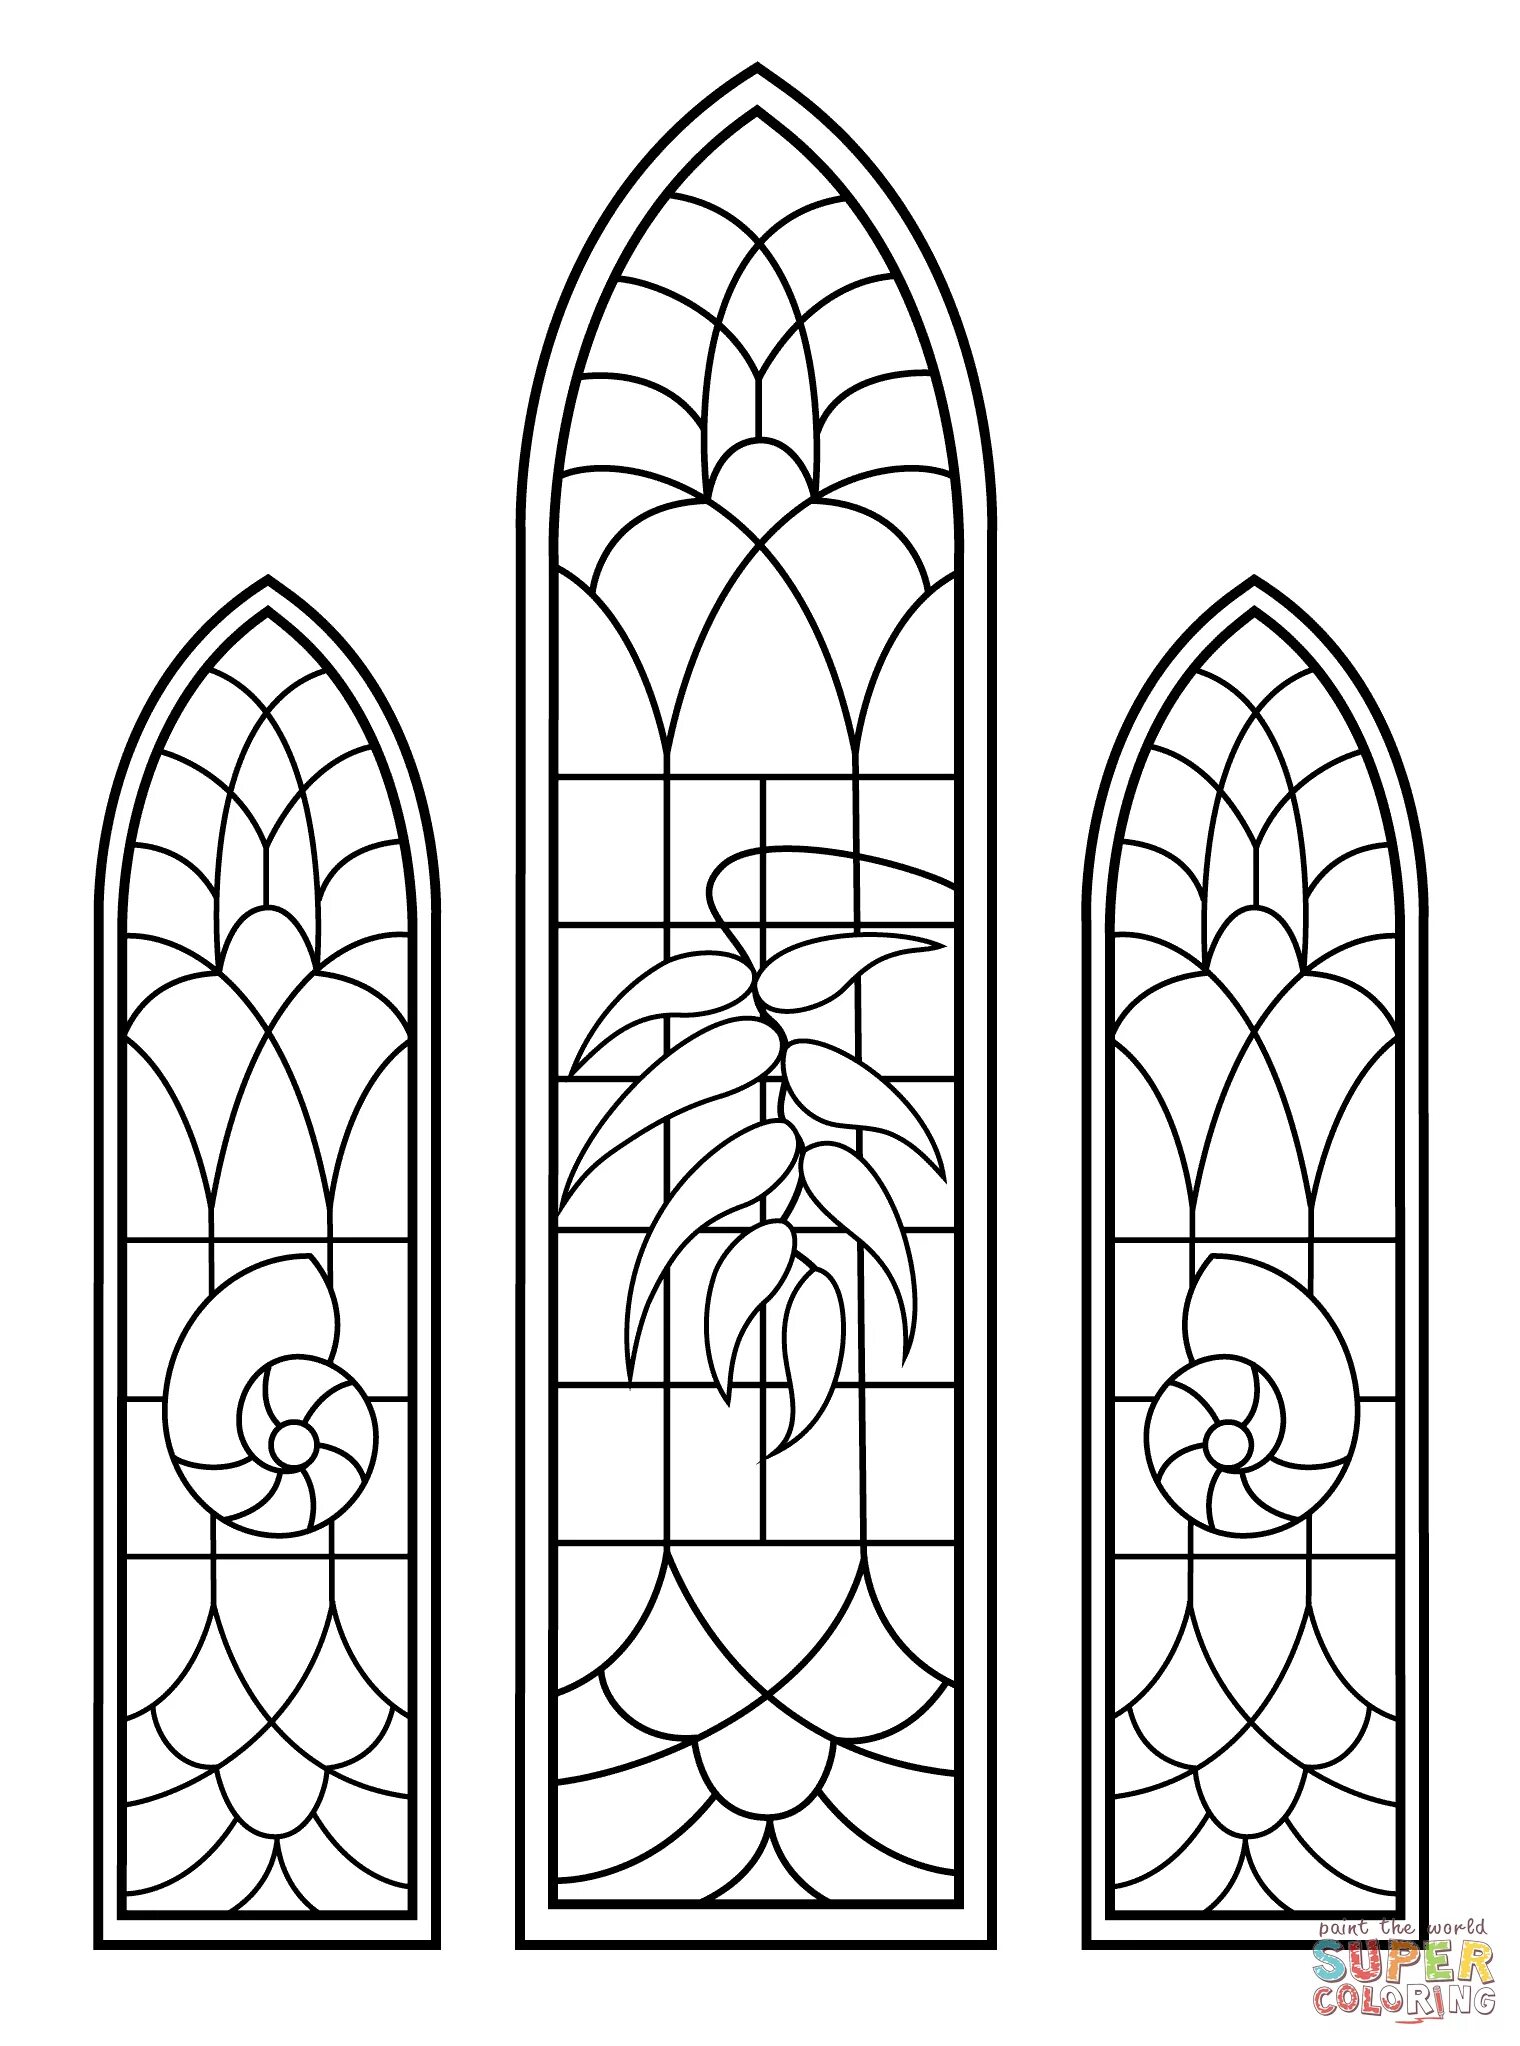 Stained glass windows #8